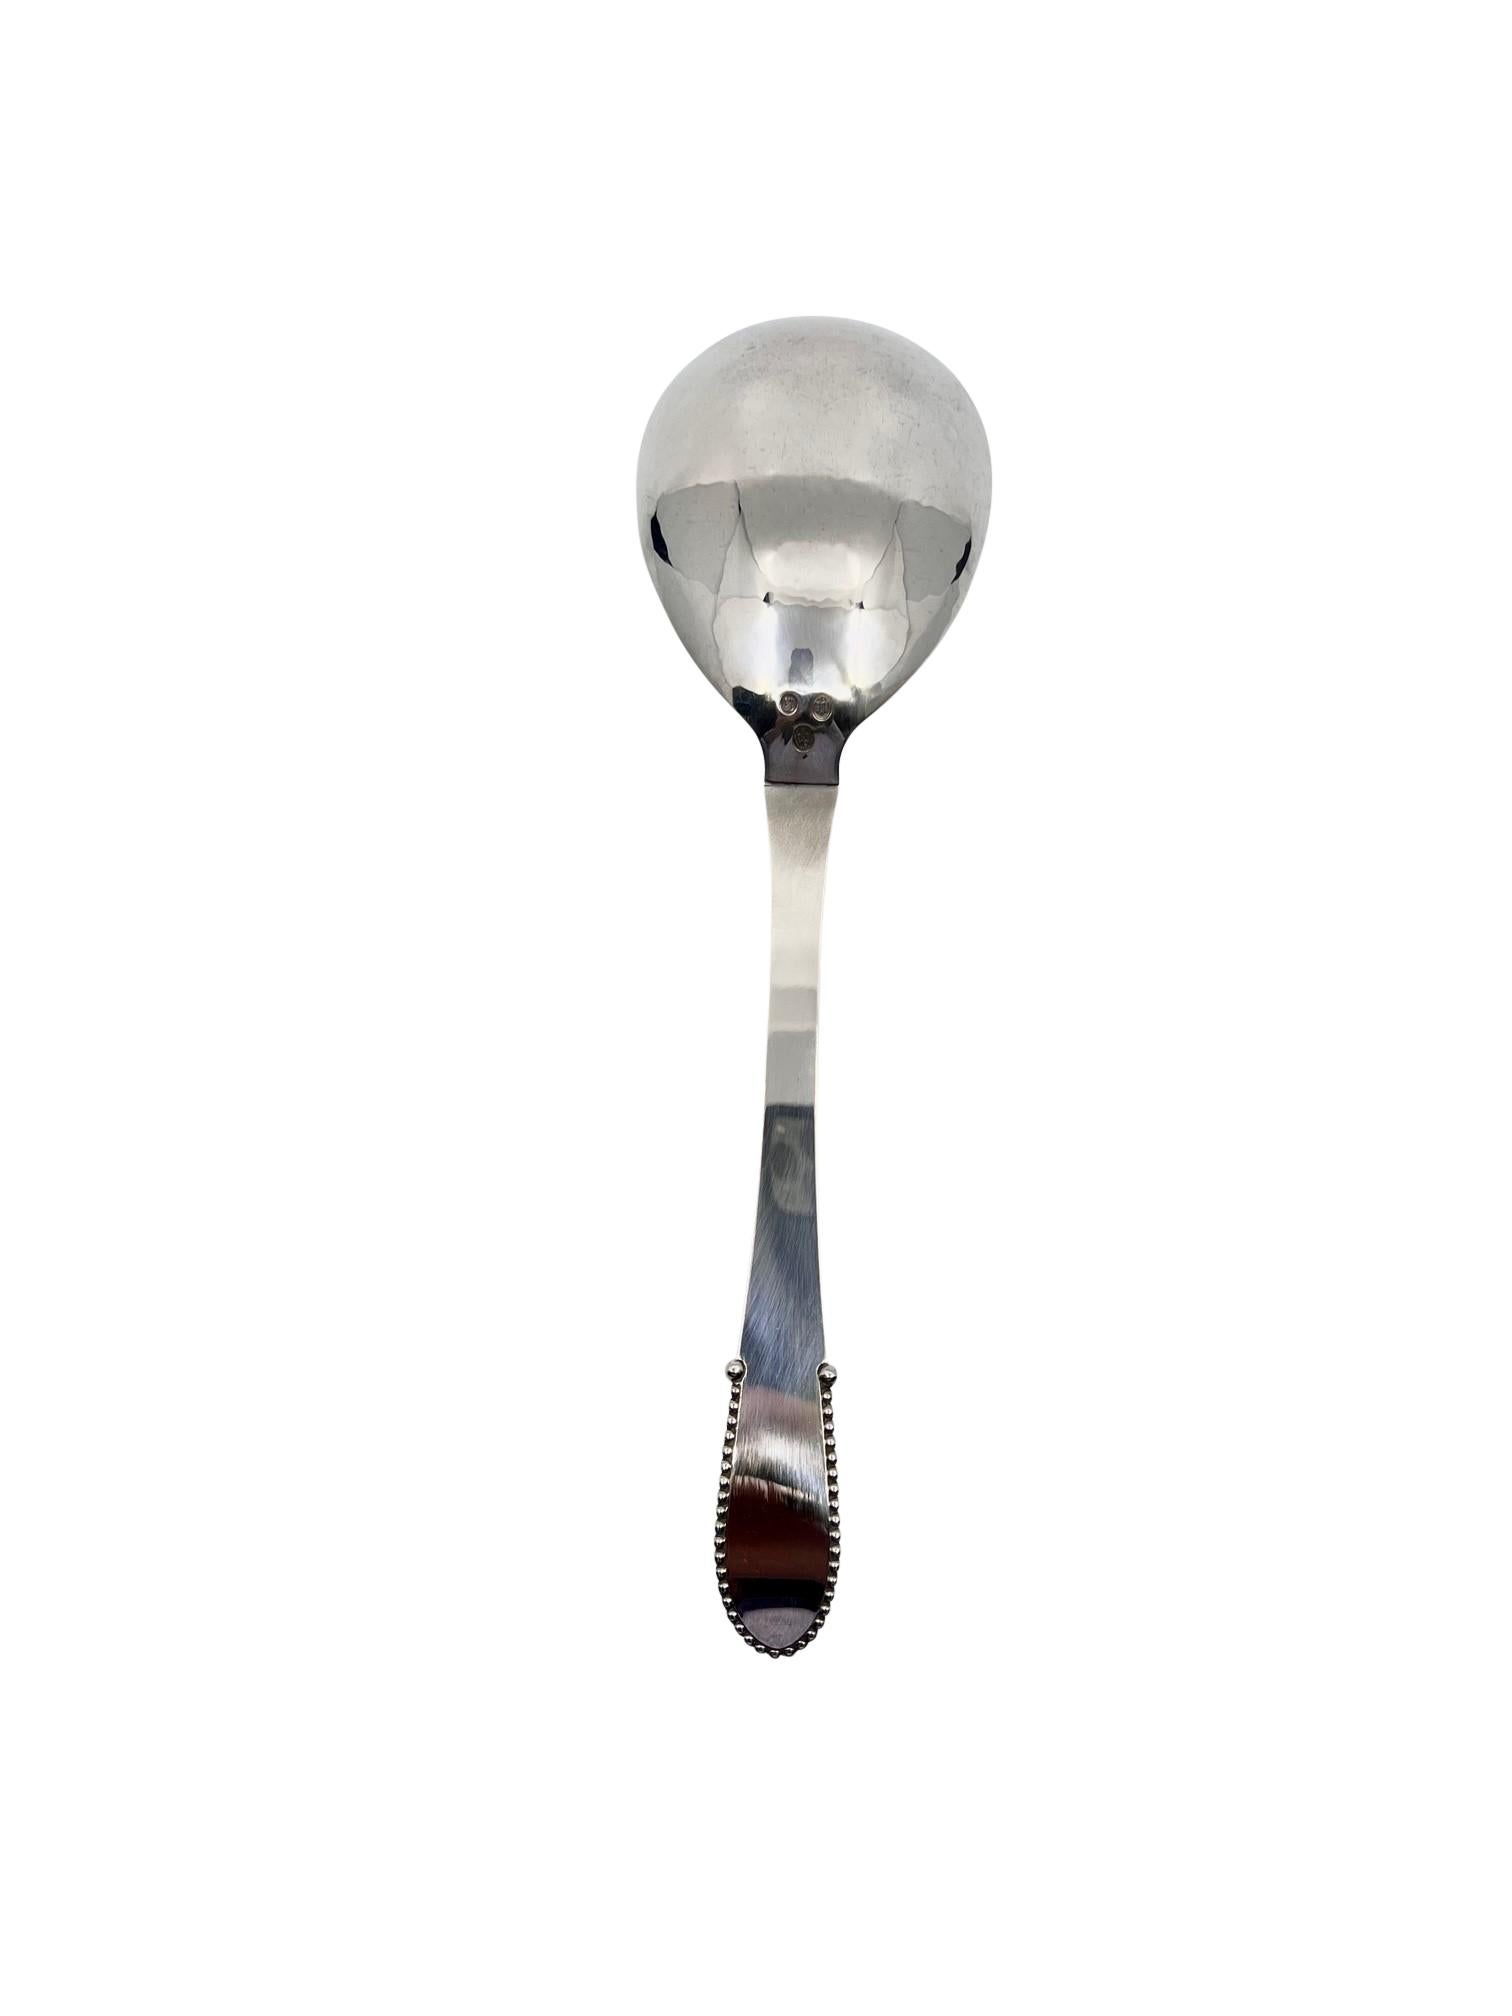 A large sterling silver Georg Jensen serving spoon, item #113 in Beaded pattern, design #7 by Georg Jensen from 1916.

Additional information:
Material: Sterling silver
Styles: Art Nouveau
Hallmarks: early 1928 date stamp, Georg Jensen 830s